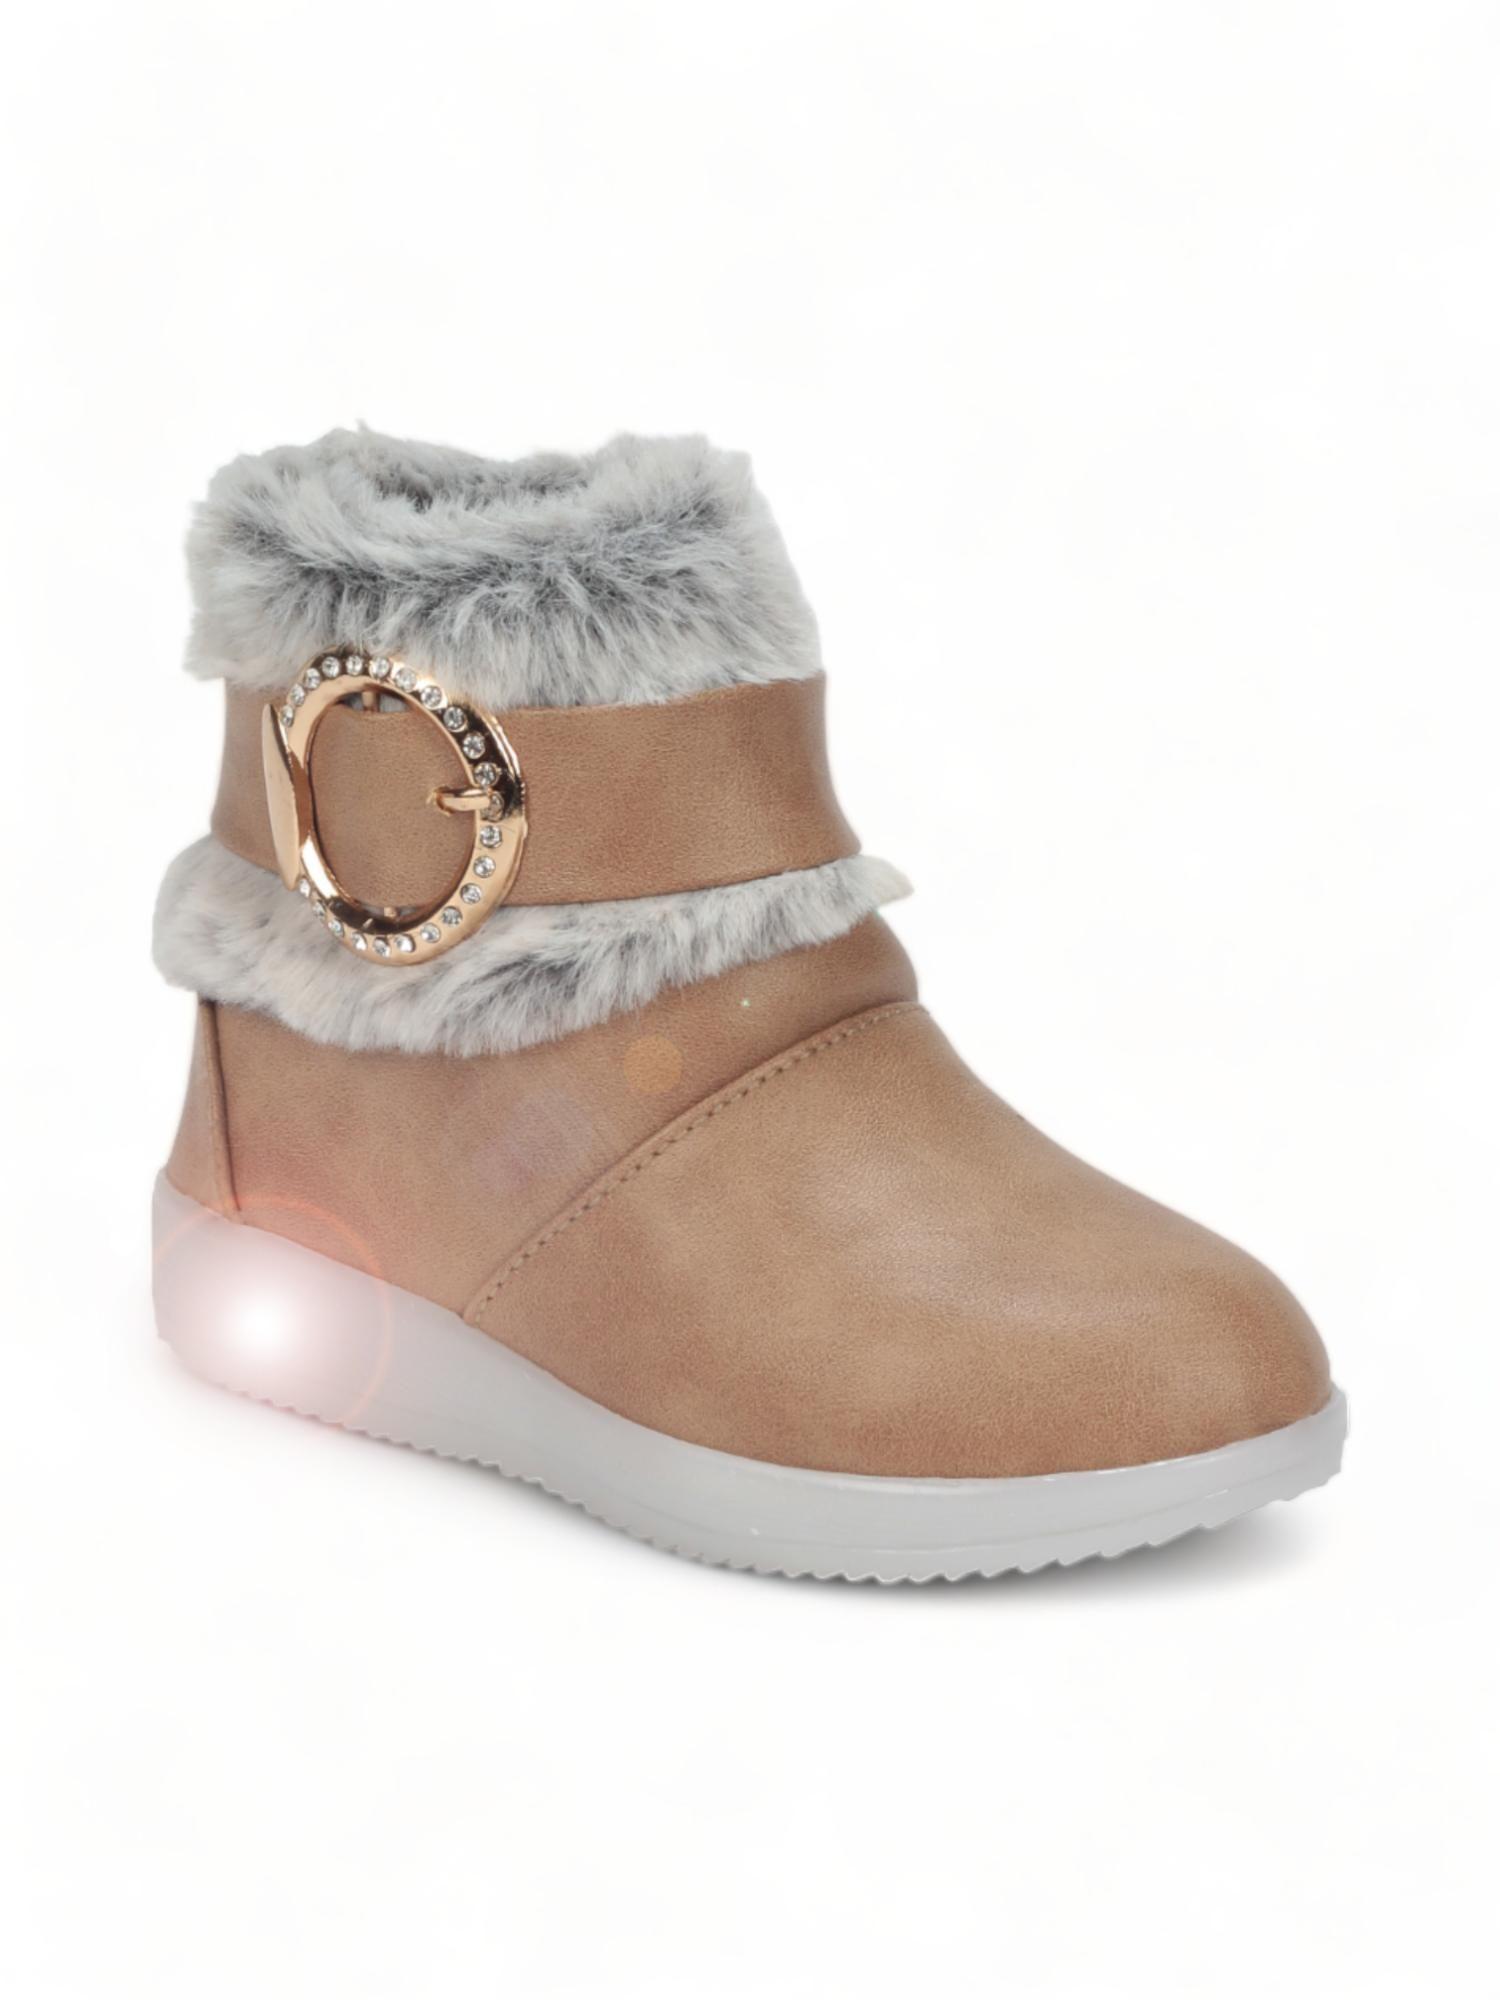 girls party boots with led light - beige